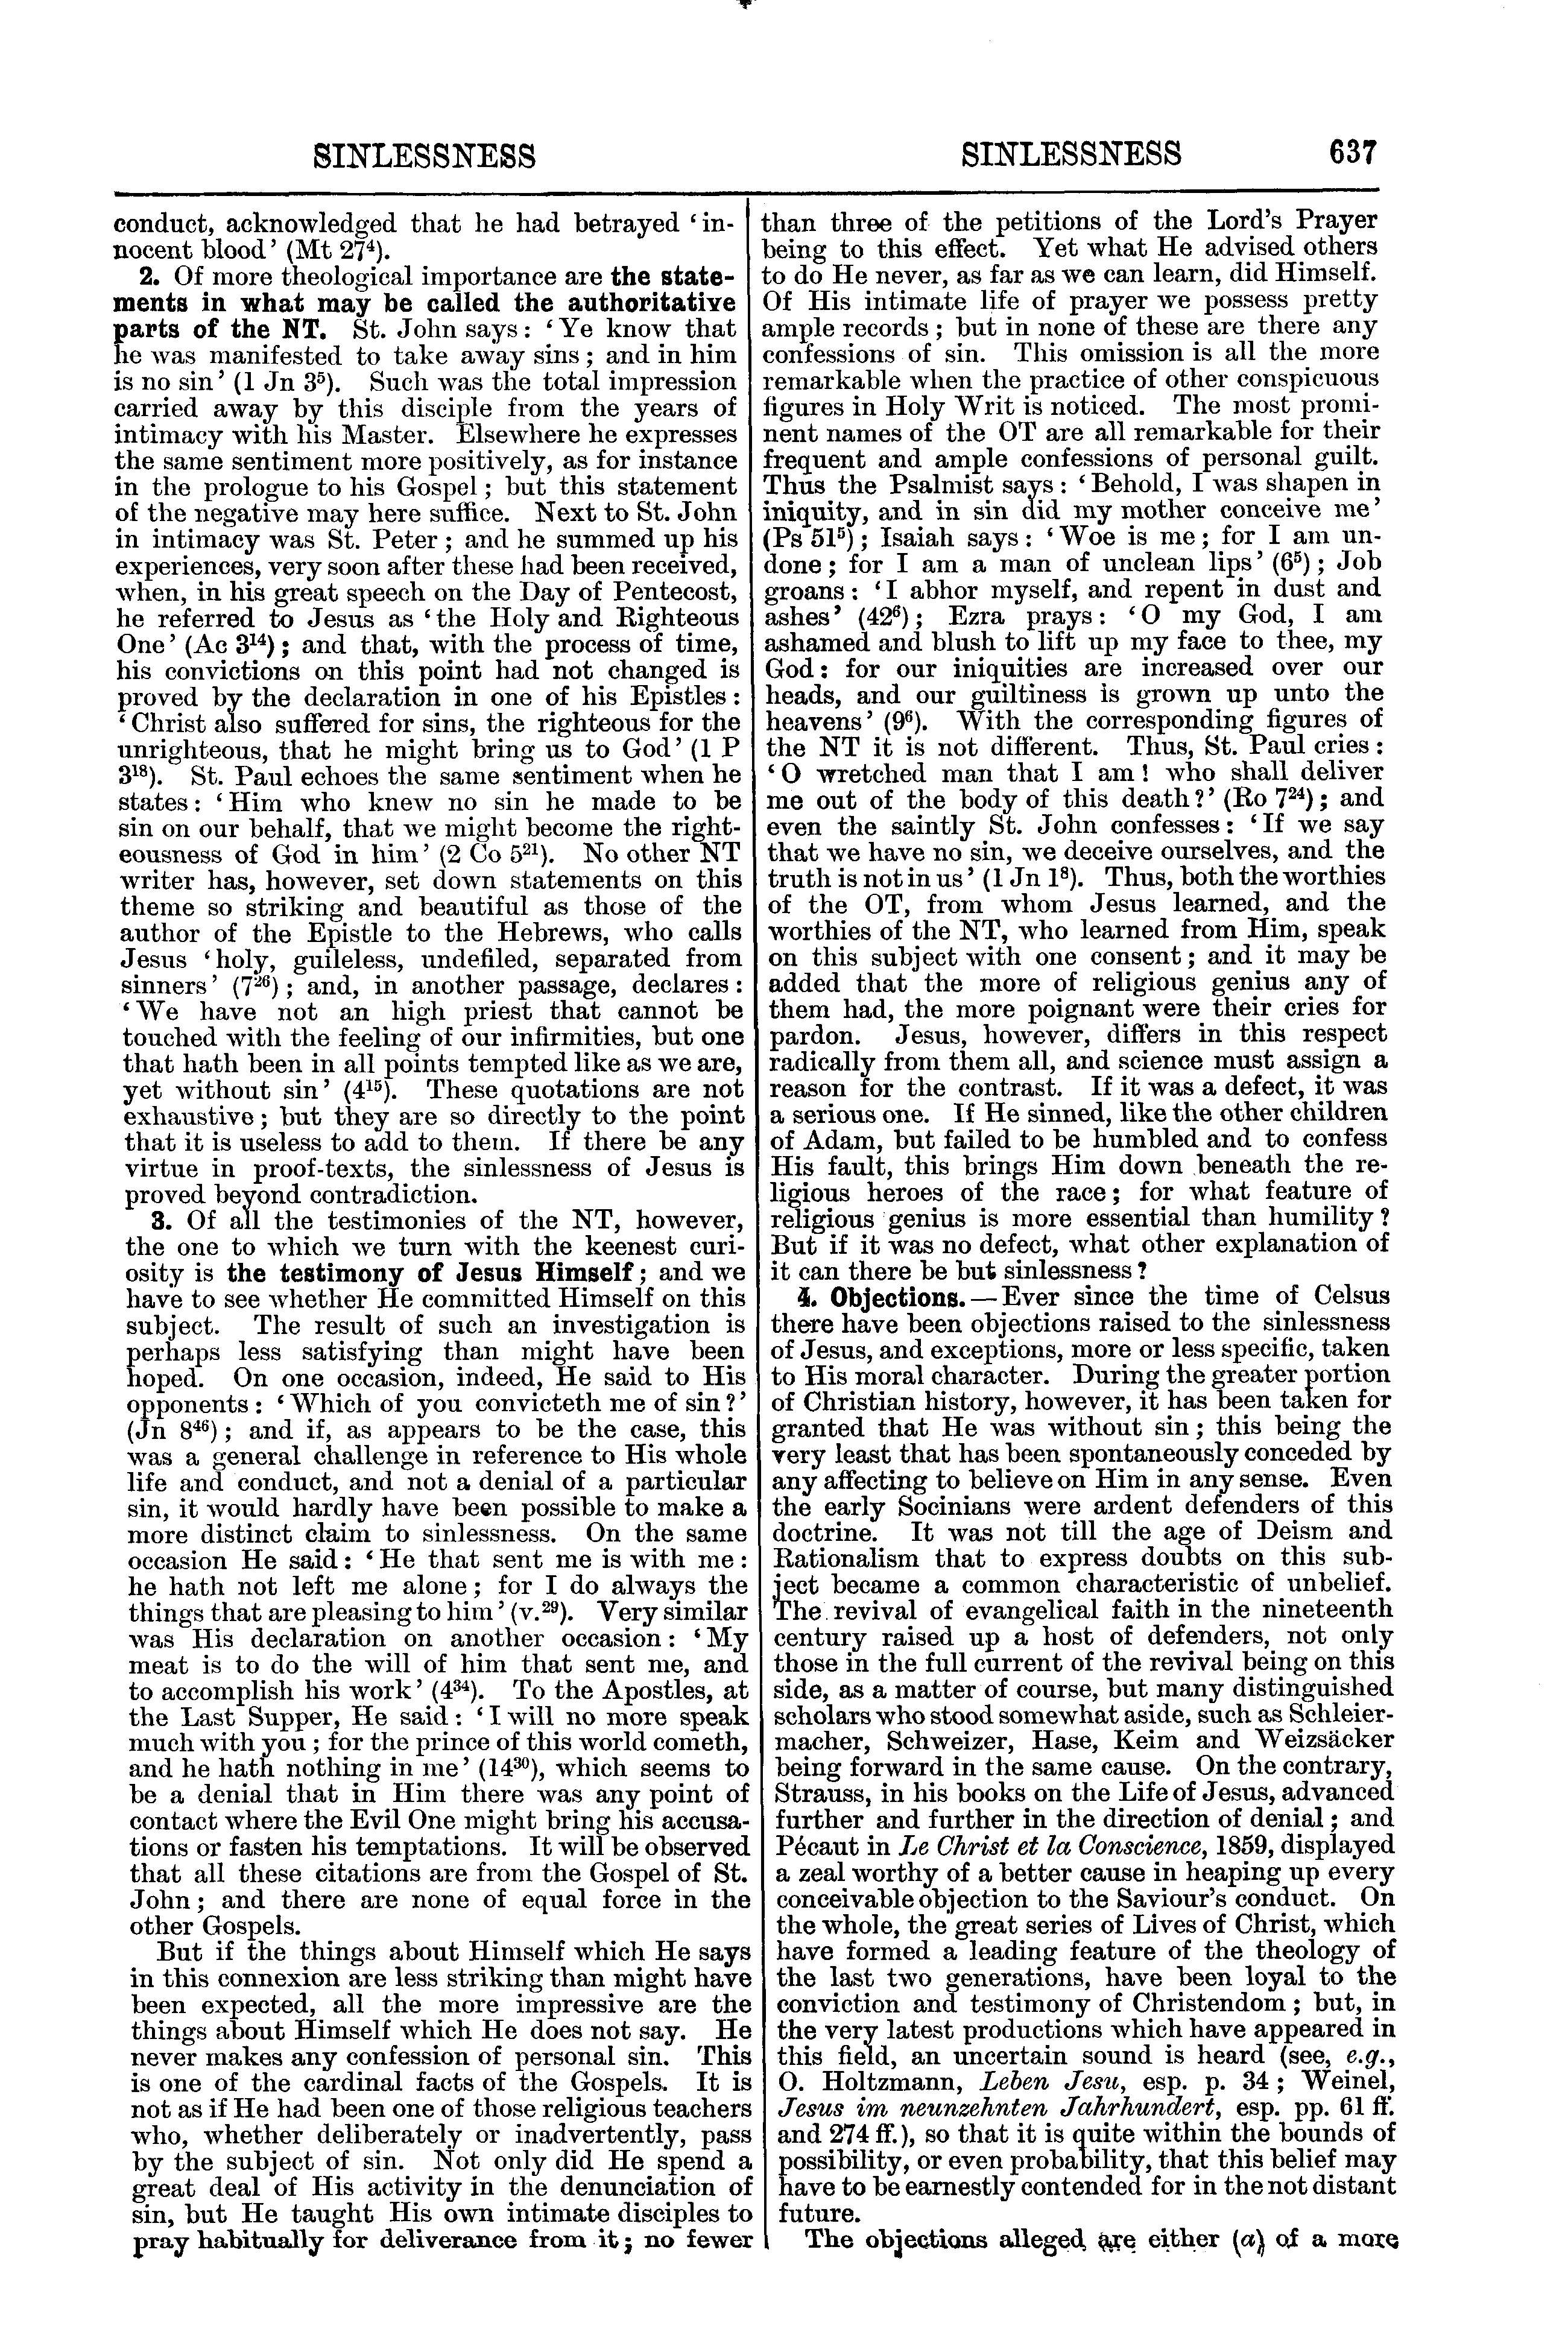 Image of page 637